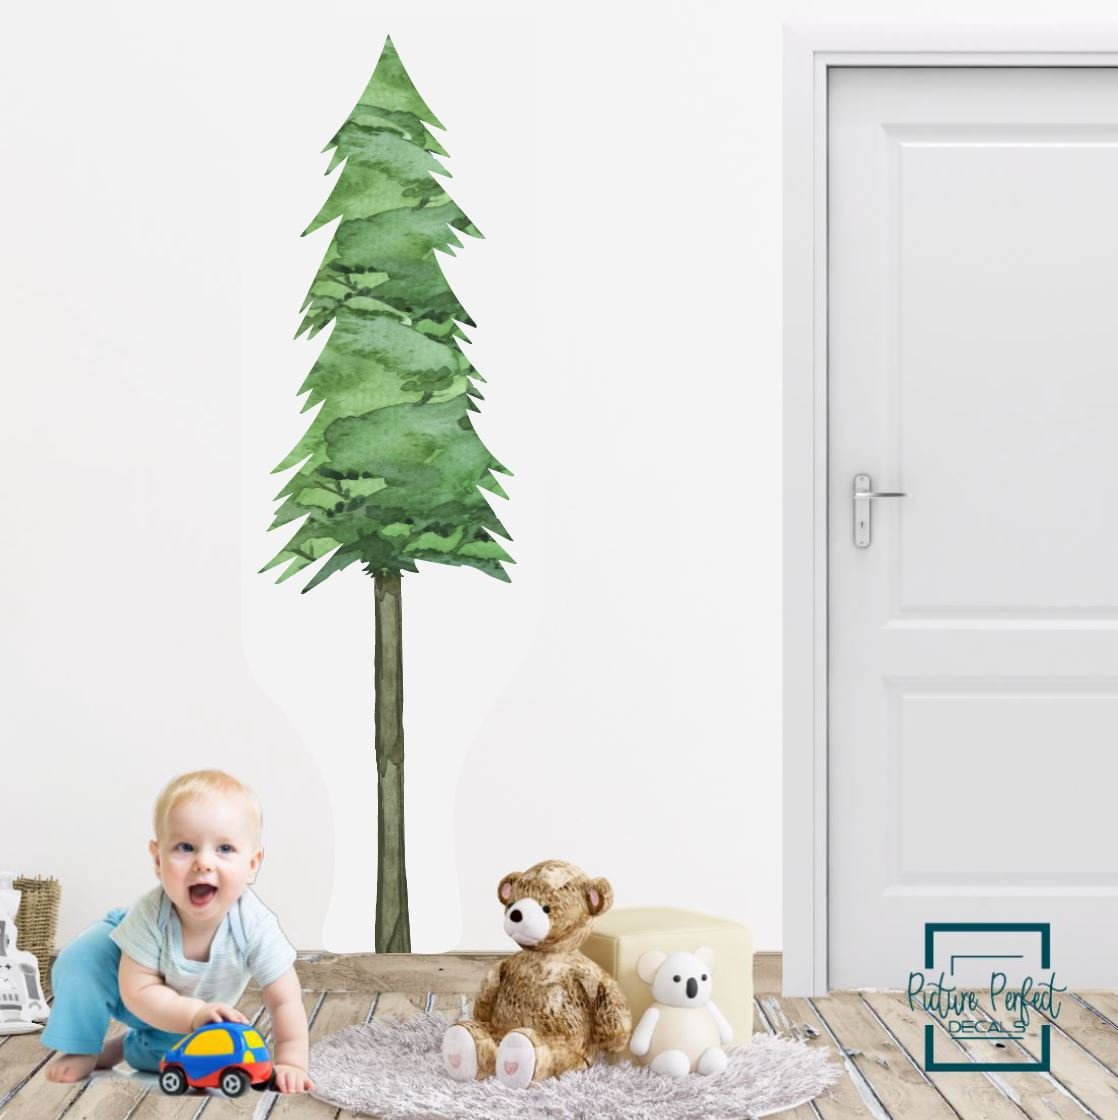 Pine Tree Wall Decals - Picture Perfect Decals